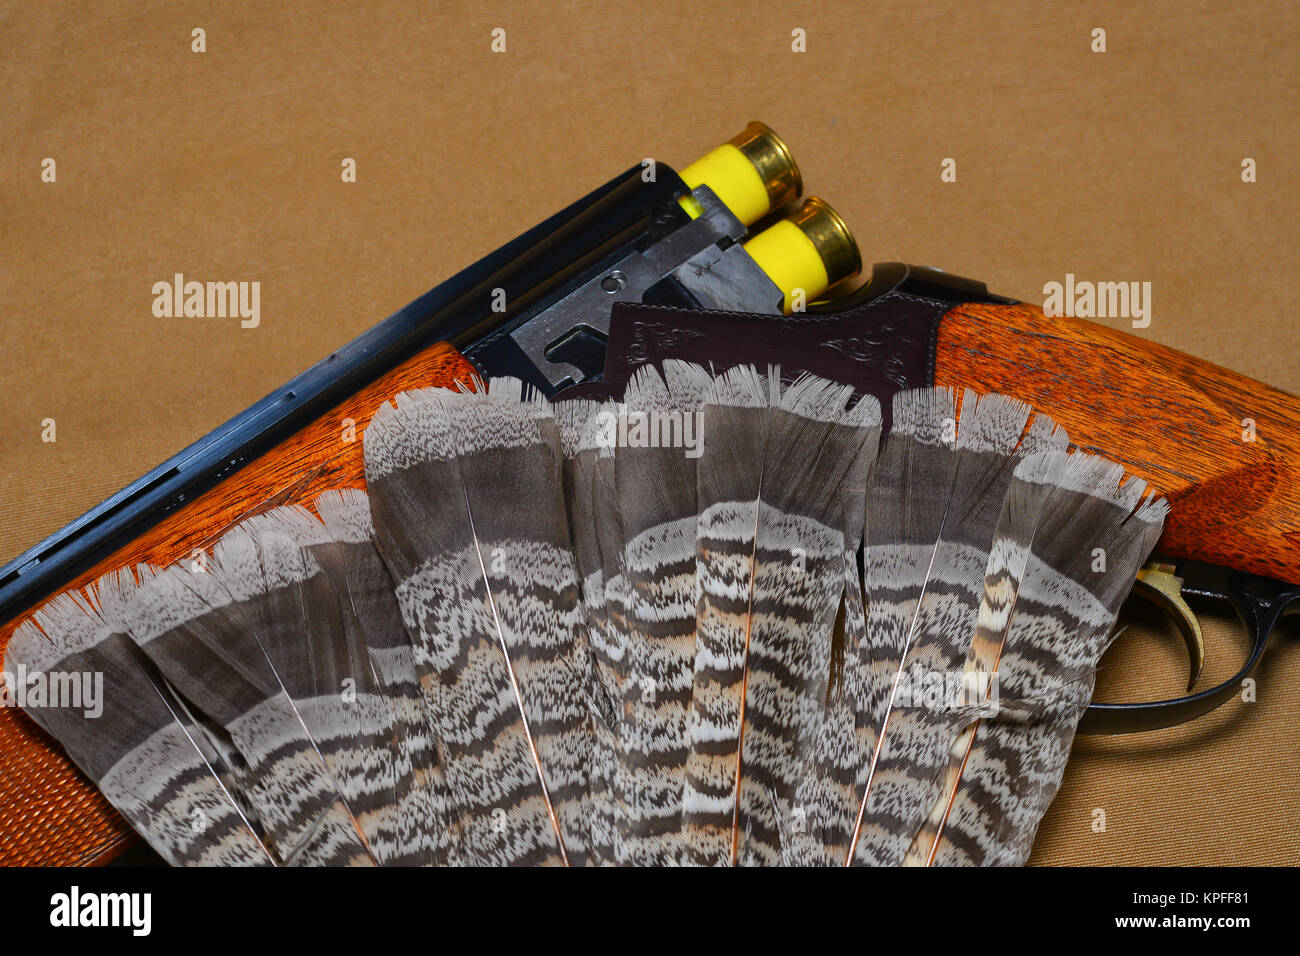 An over and under 20 ga. shotgun loaded with shells on a brown canvas background with tail feathers from a ruffed grouse. Stock Photo